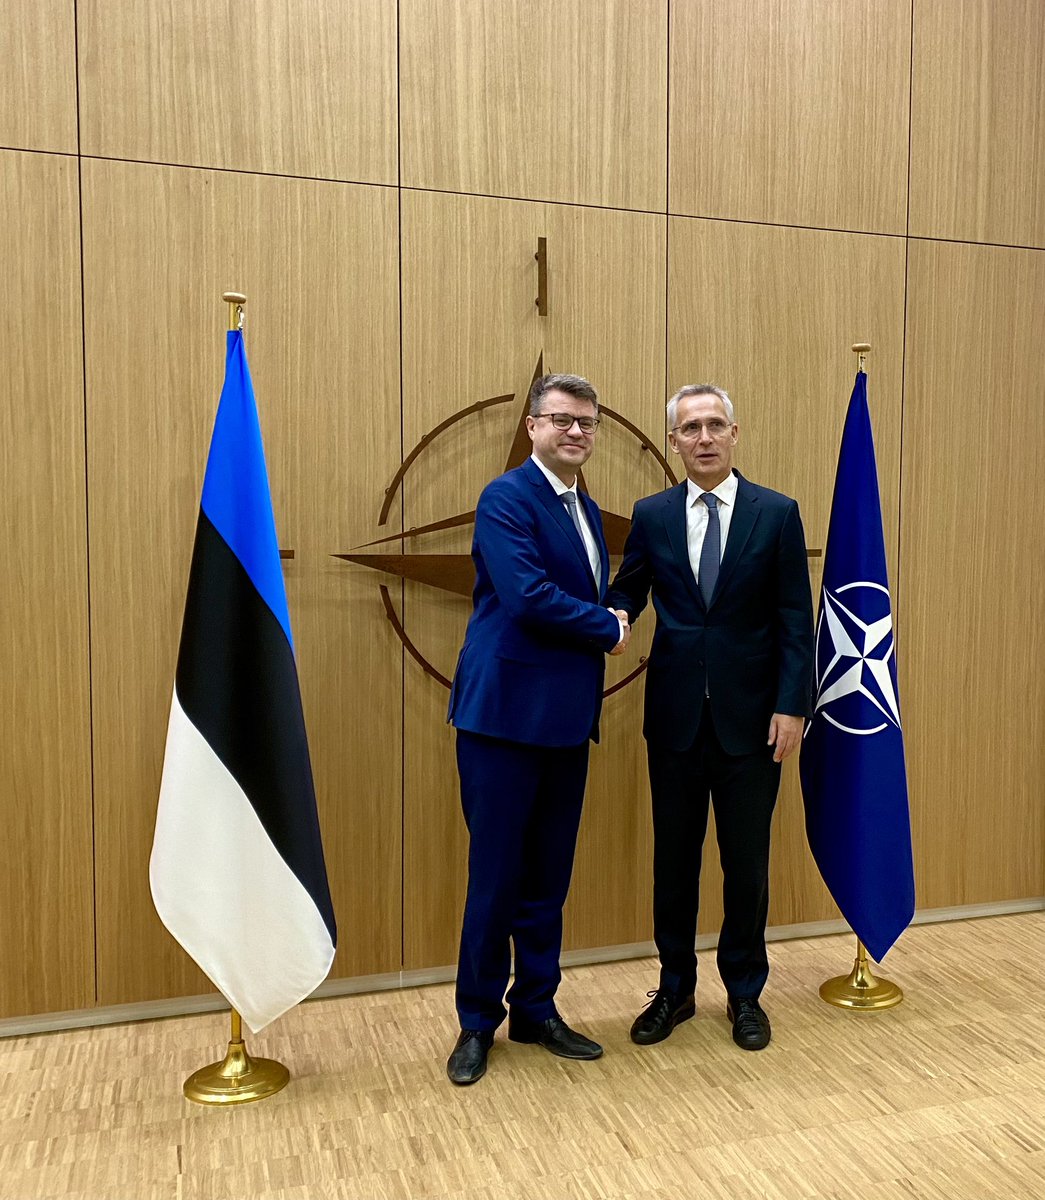 Important meeting with SG of @NATO @jensstoltenberg today. We discussed implementing decisions made in #MadridSummit, NATO members’ support to #Ukraine with air defence systems & missiles to defend civic infrastructure and 🇺🇦 path to #NATO.